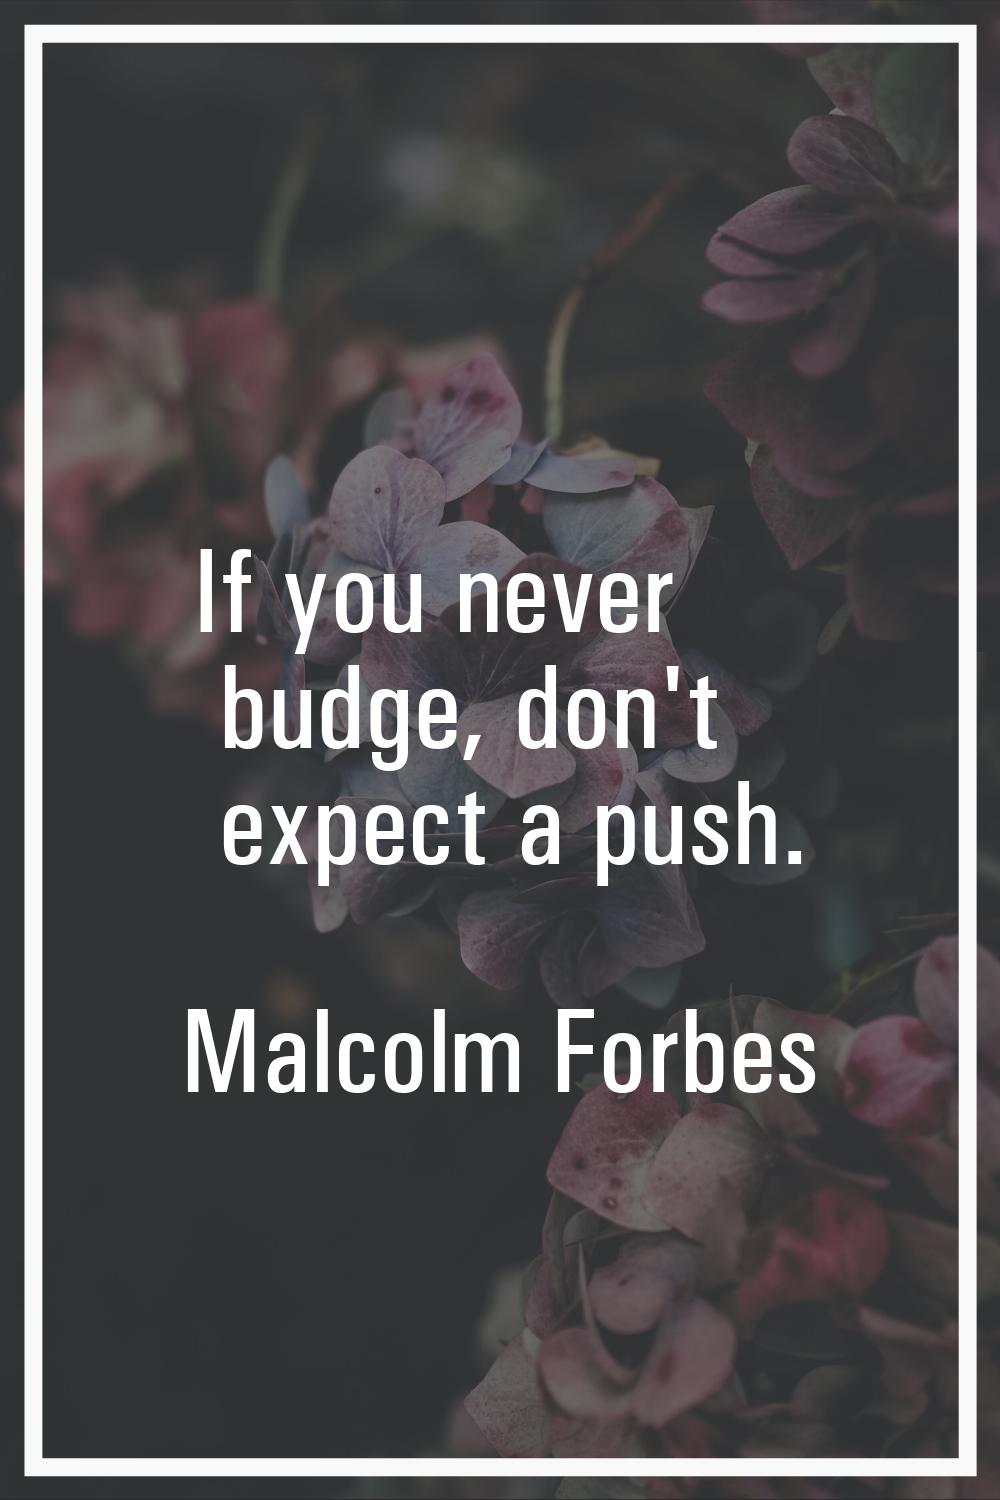 If you never budge, don't expect a push.